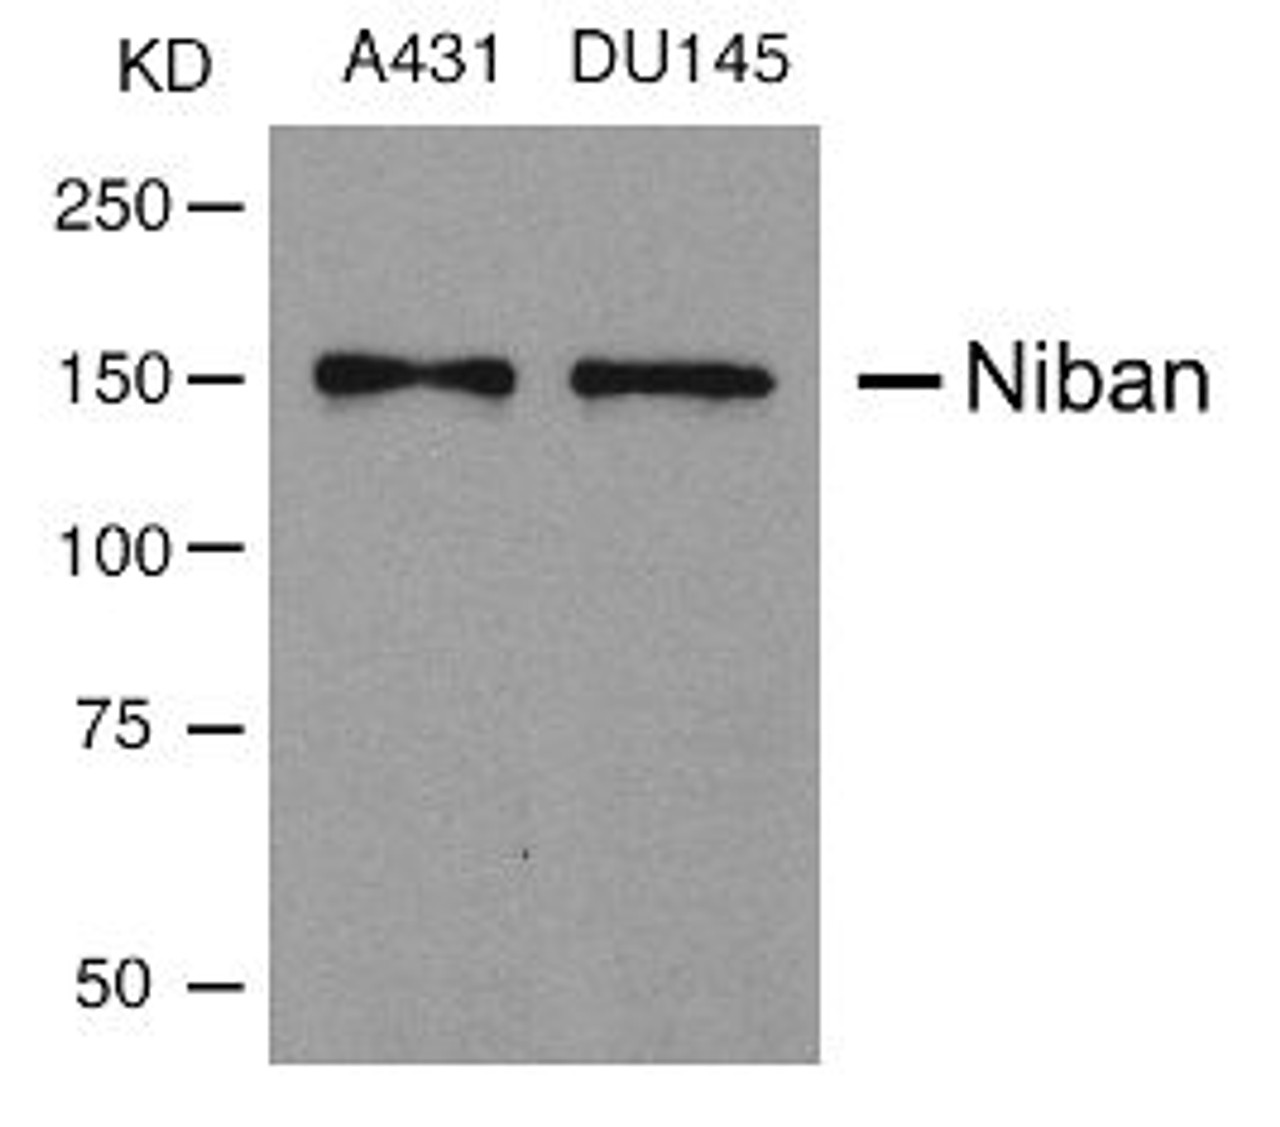 Western blot analysis of lysed extracts from A431 and DU145 cells using Niban Antibody.